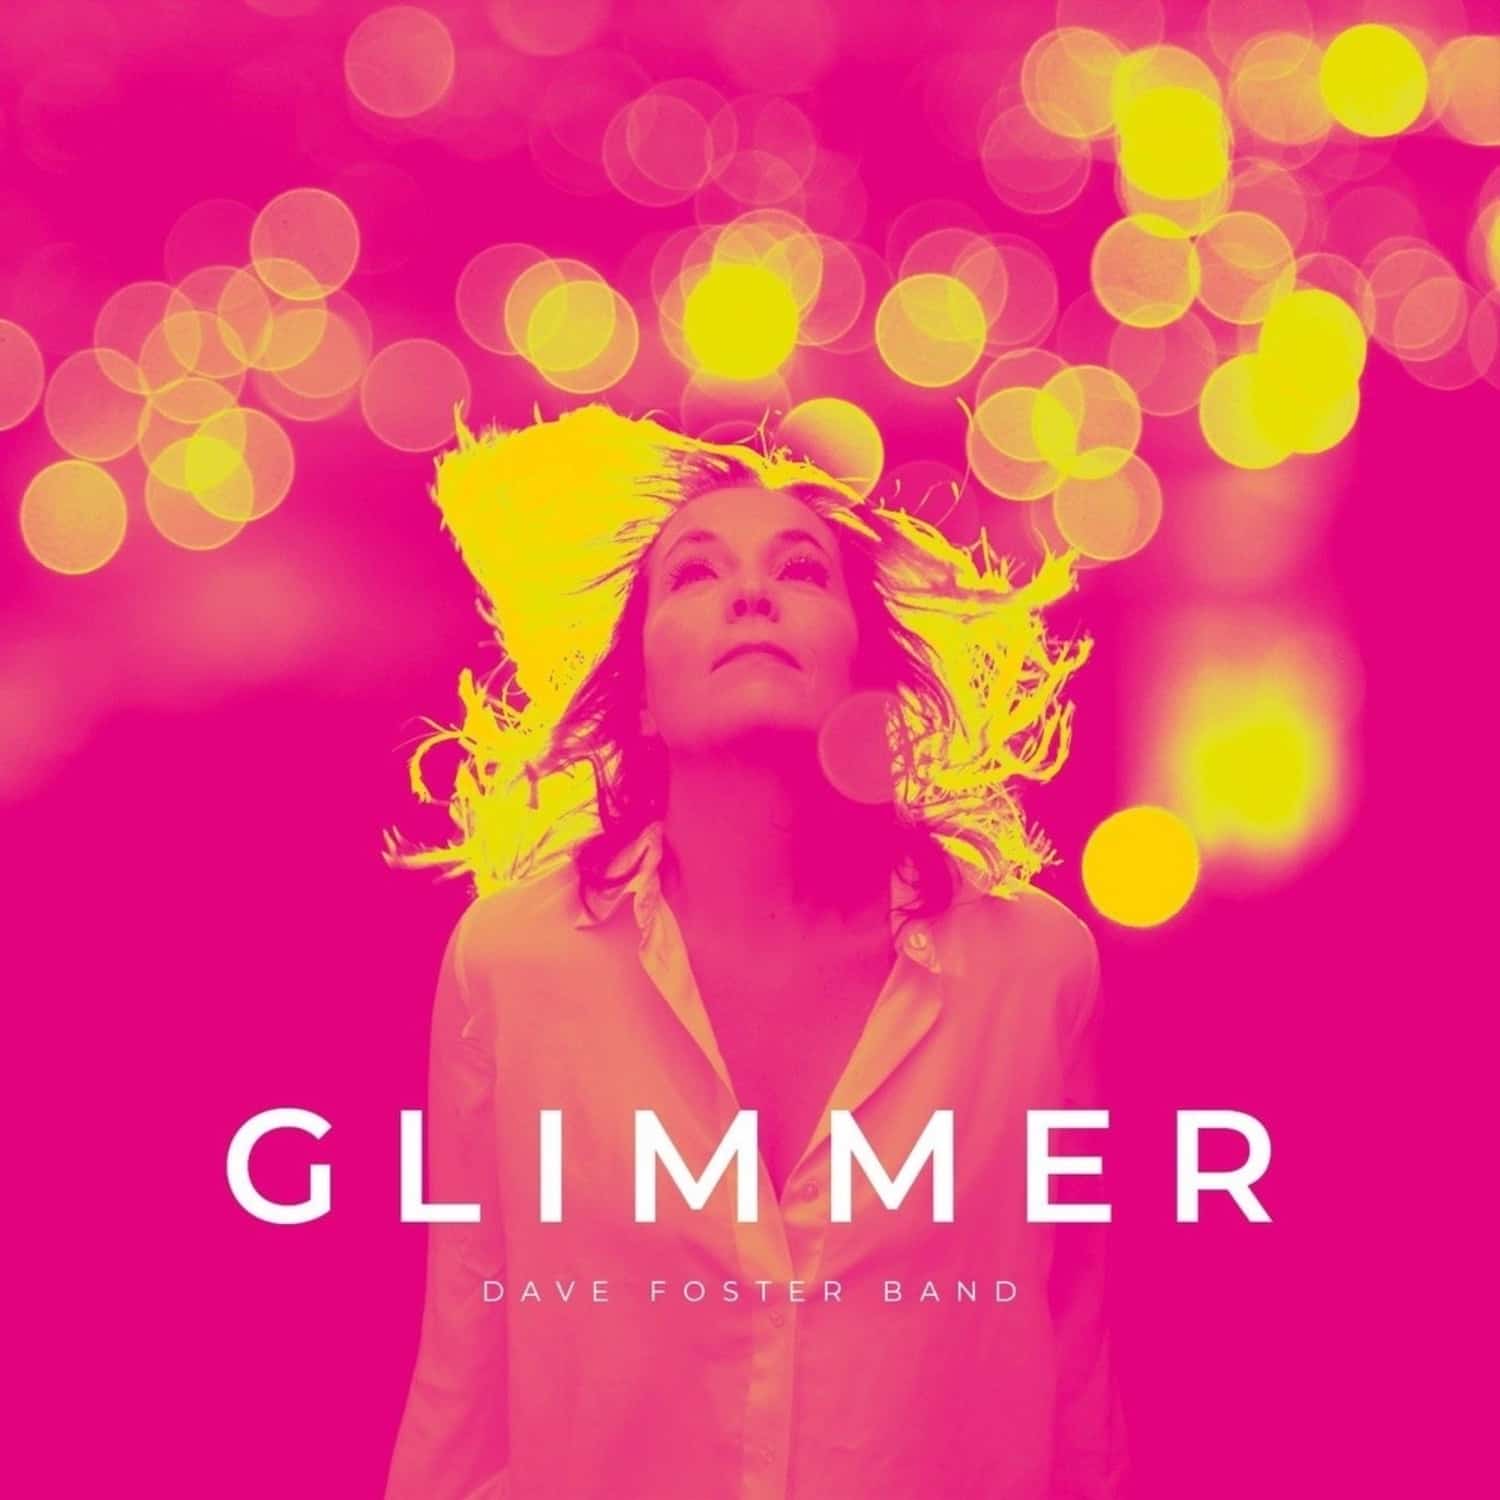 Dave Foster Band - GLIMMER 